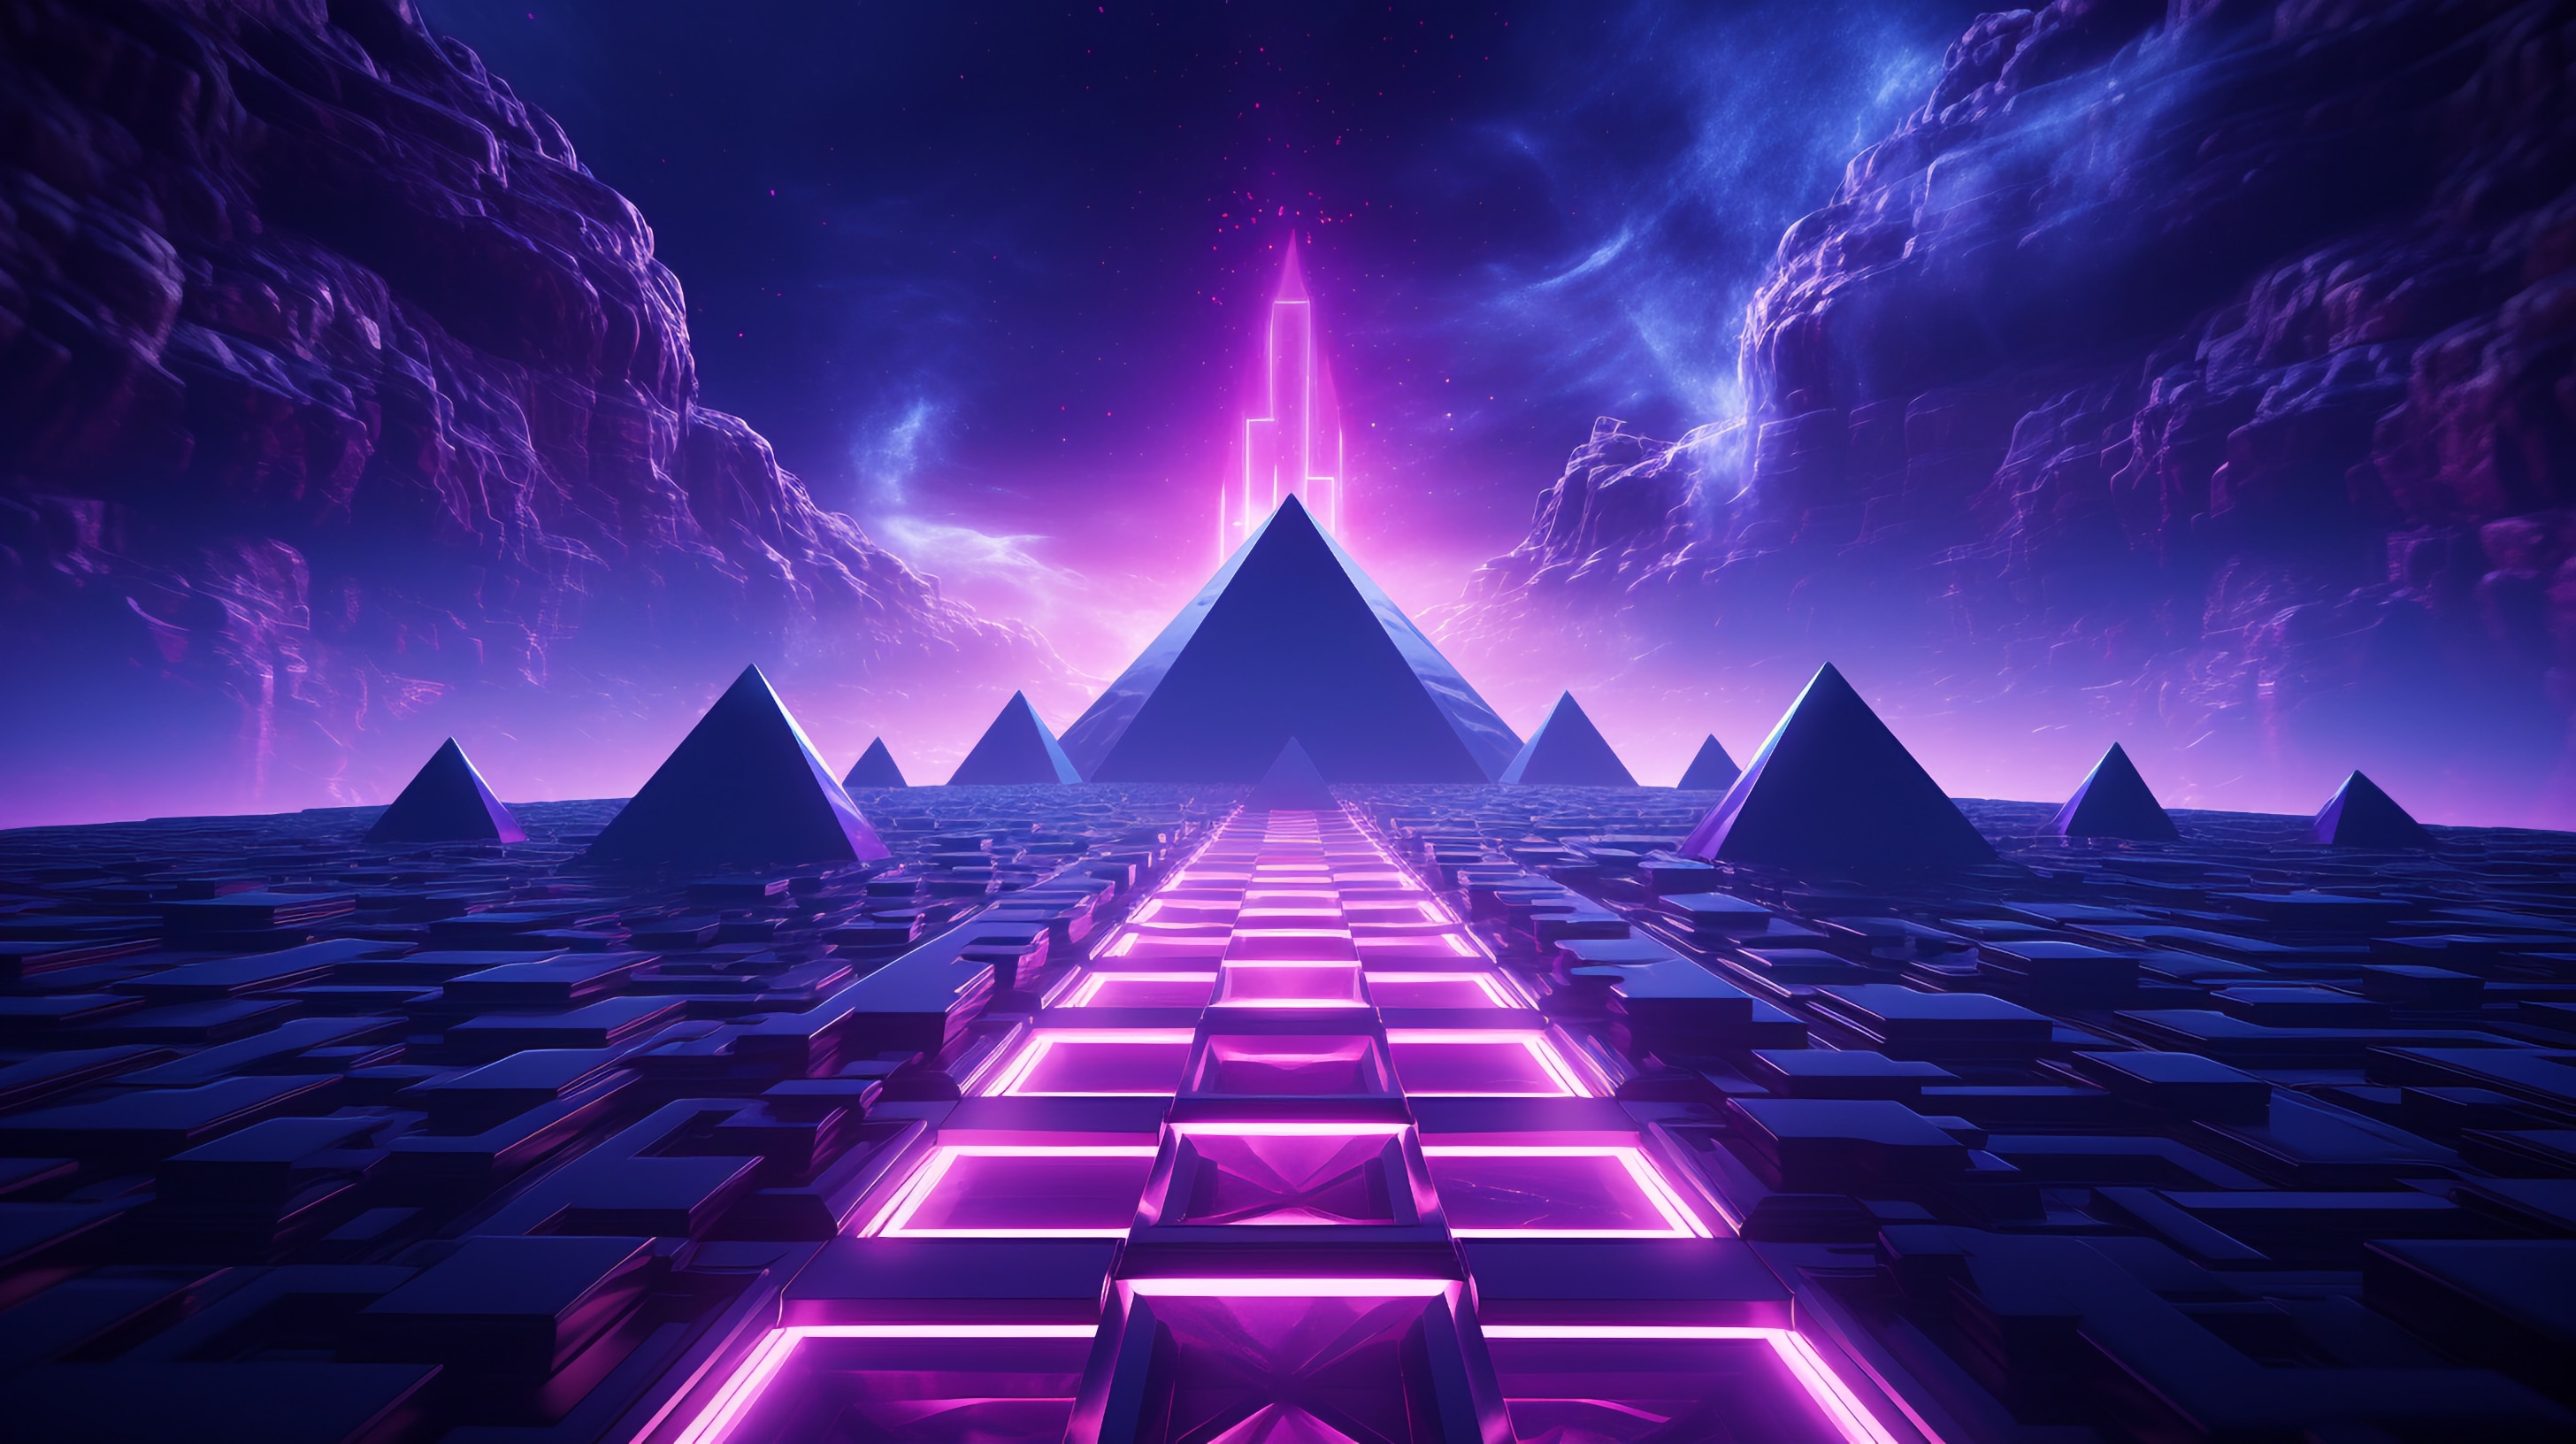 Striking digital art landscape with a neon-lit pathway leading towards a central pyramid under a starry, dusk-hued sky, evoking a sense of futuristic or alternate reality.